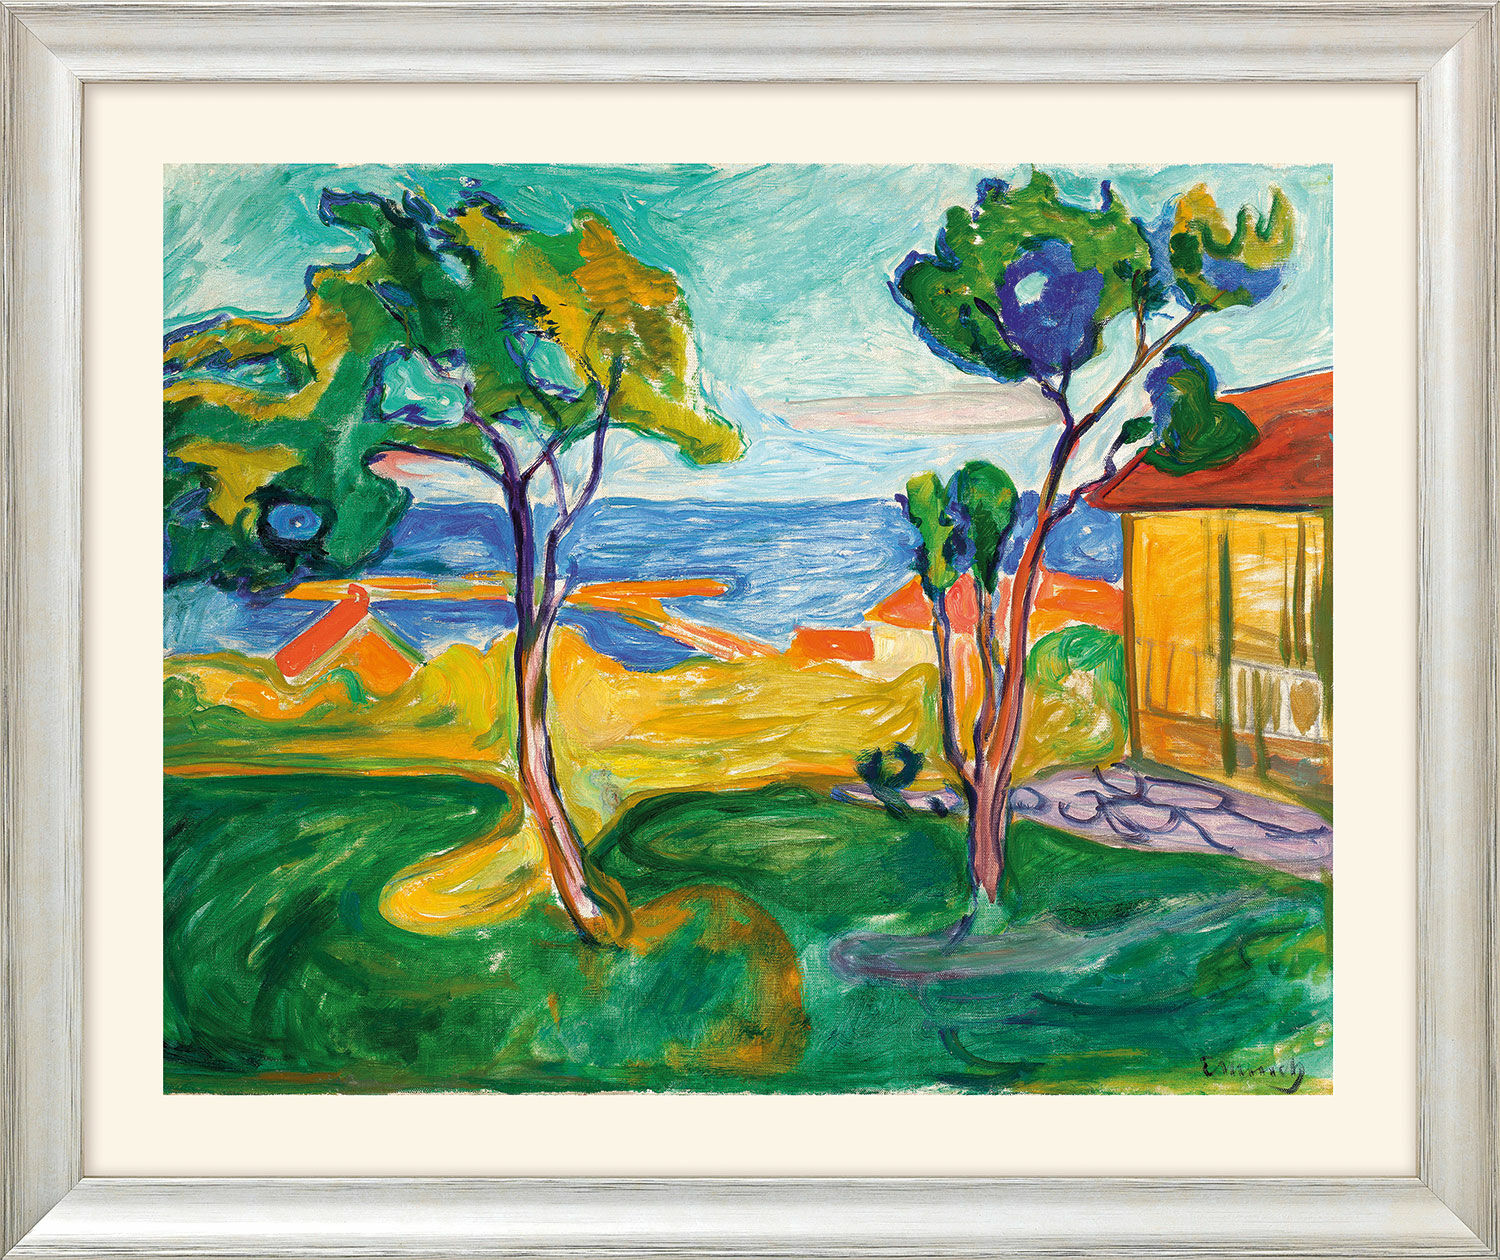 Picture "The Garden in Asgardstrand" (1904-05) - from "Seasons Cycle", silver-coloured framed version by Edvard Munch